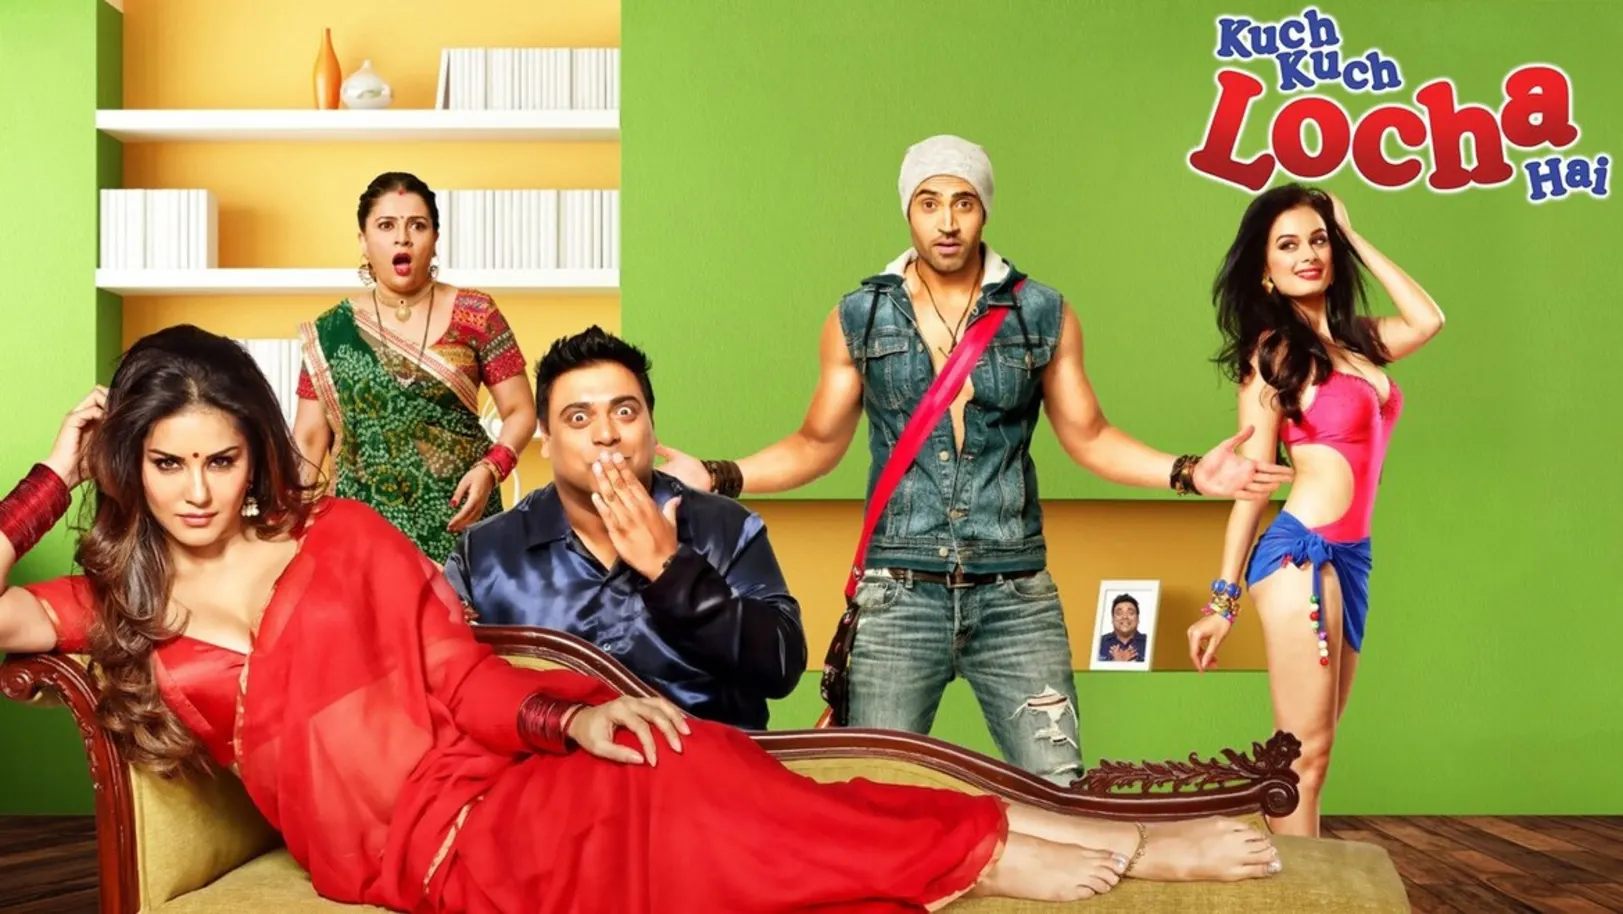 Kuch Kuch Locha Hai Streaming Now On &Pictures